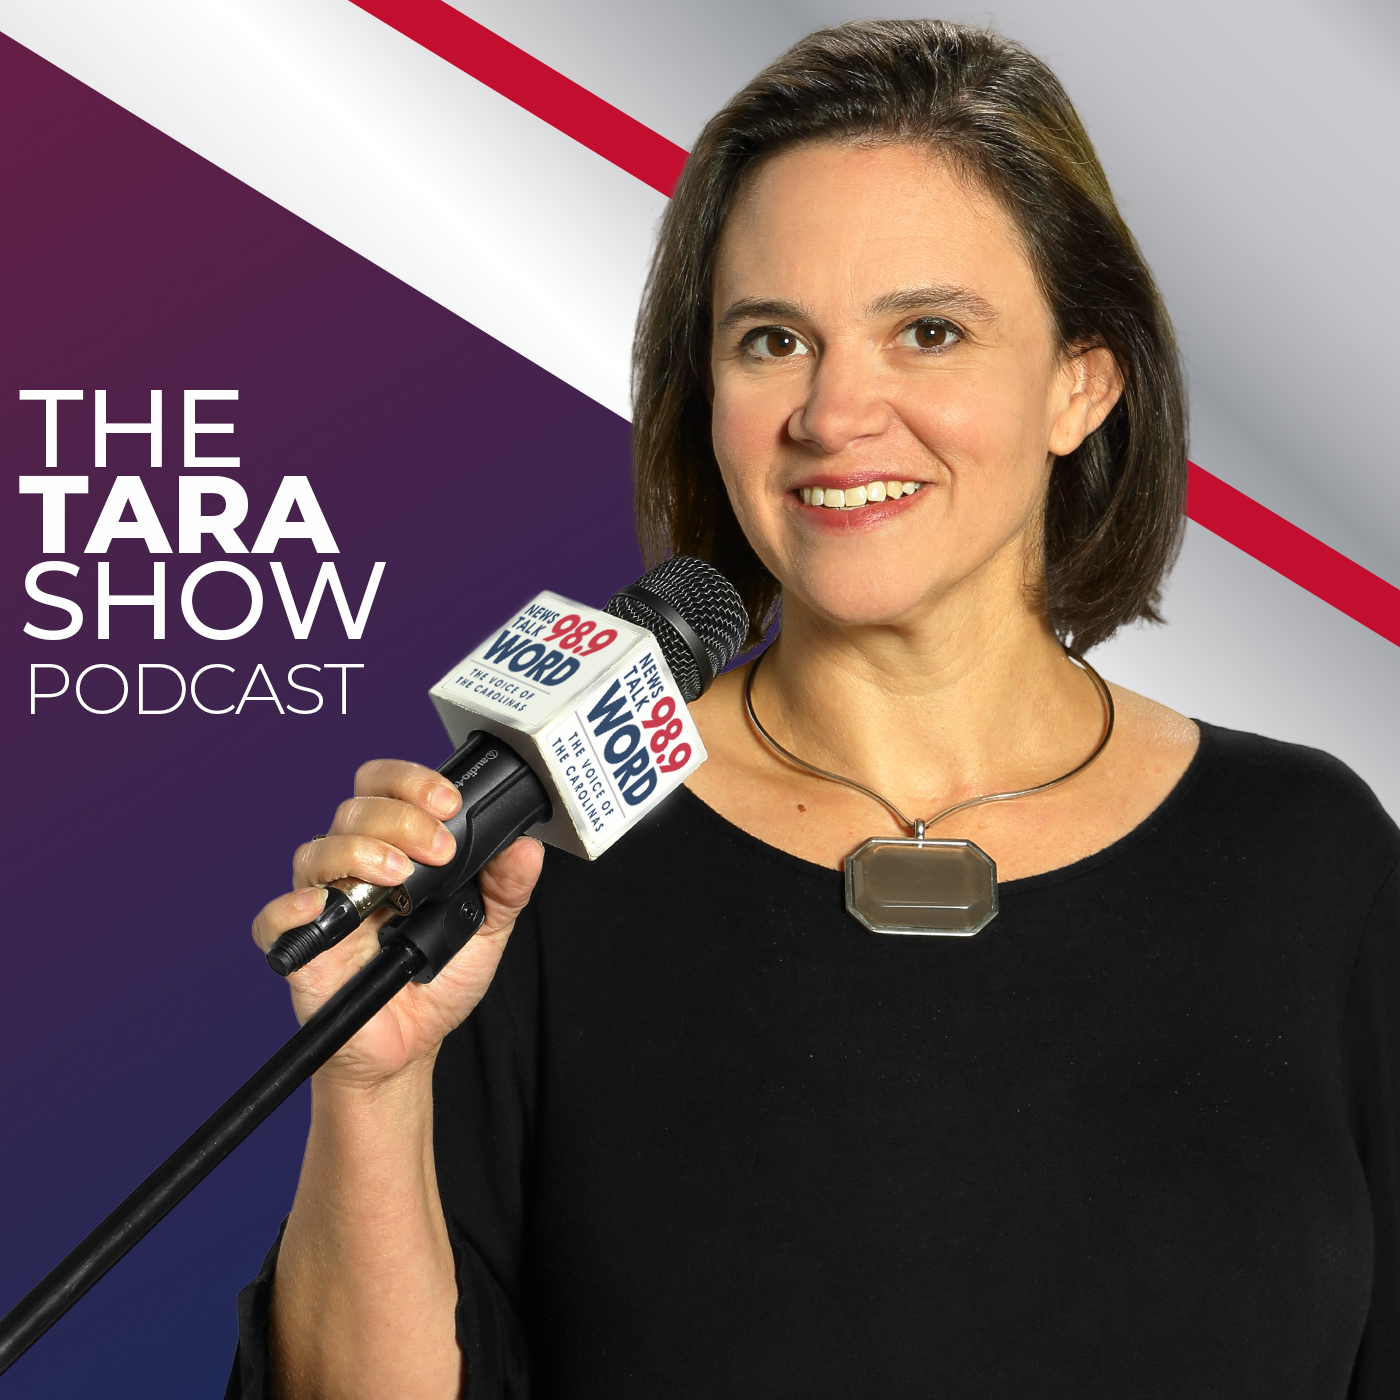 Hour 3: The Tara Show - “Rino’s and Run offs  with Special Guest Sean Moran” “Shocking Polling” “Tariffs to Fund the Government” “America’s Migrant Gang Invasion”